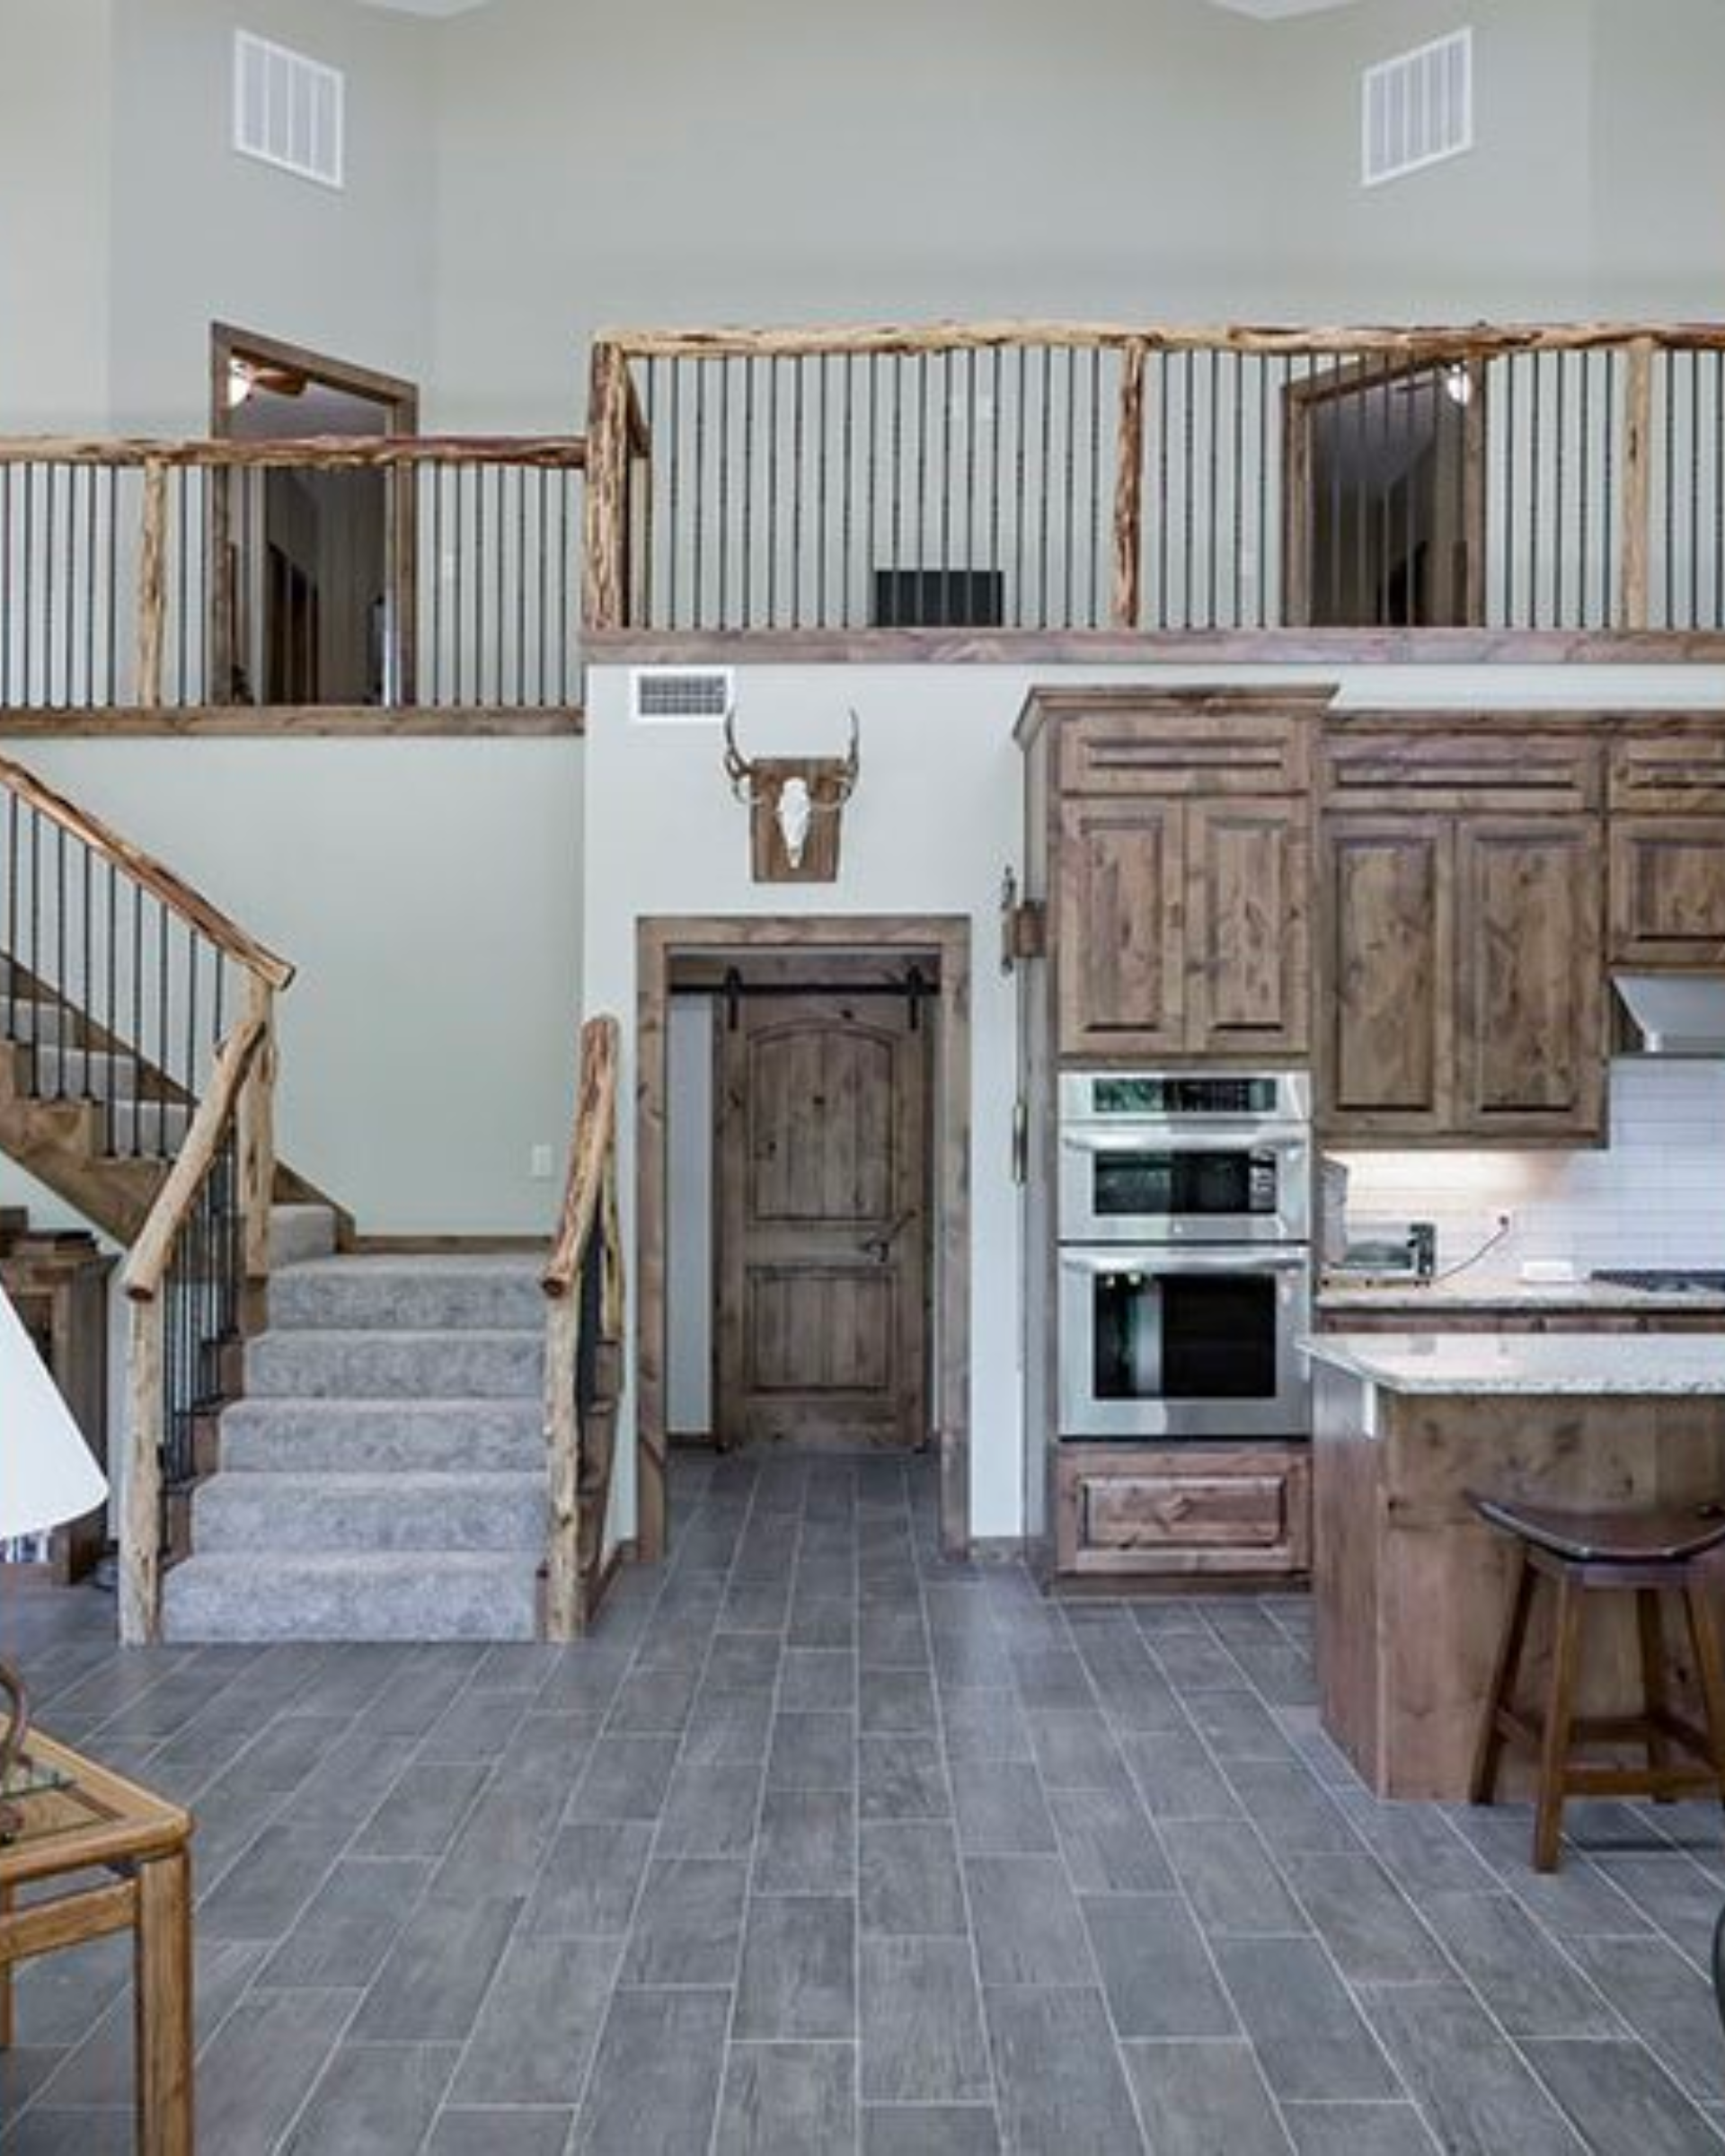 Gorgeous Interior of a two-level barndominium with wood grain acdents throughout the rustic vintage interior design